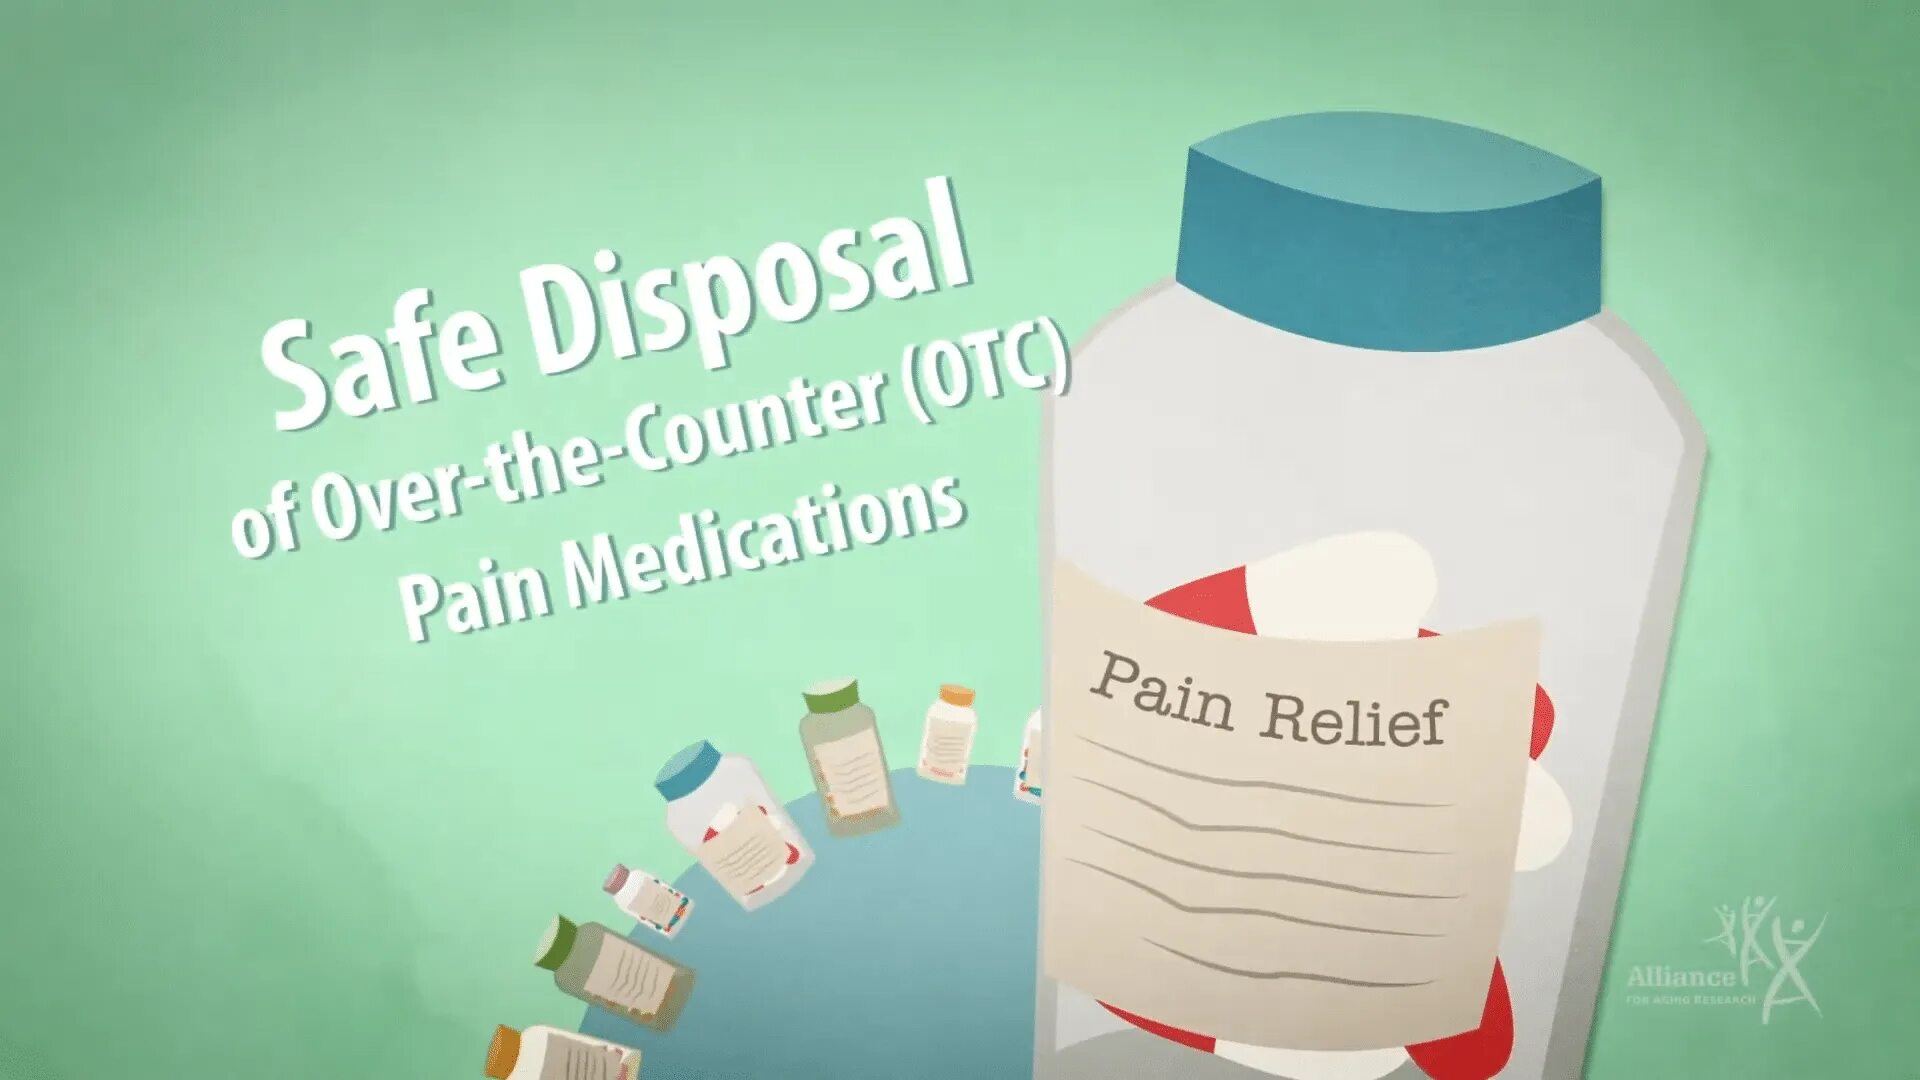 OTC medications. Storage Medicines safely. OTC drugs | Pain Relievers, Anti-inflammatory, Allergy Relief.